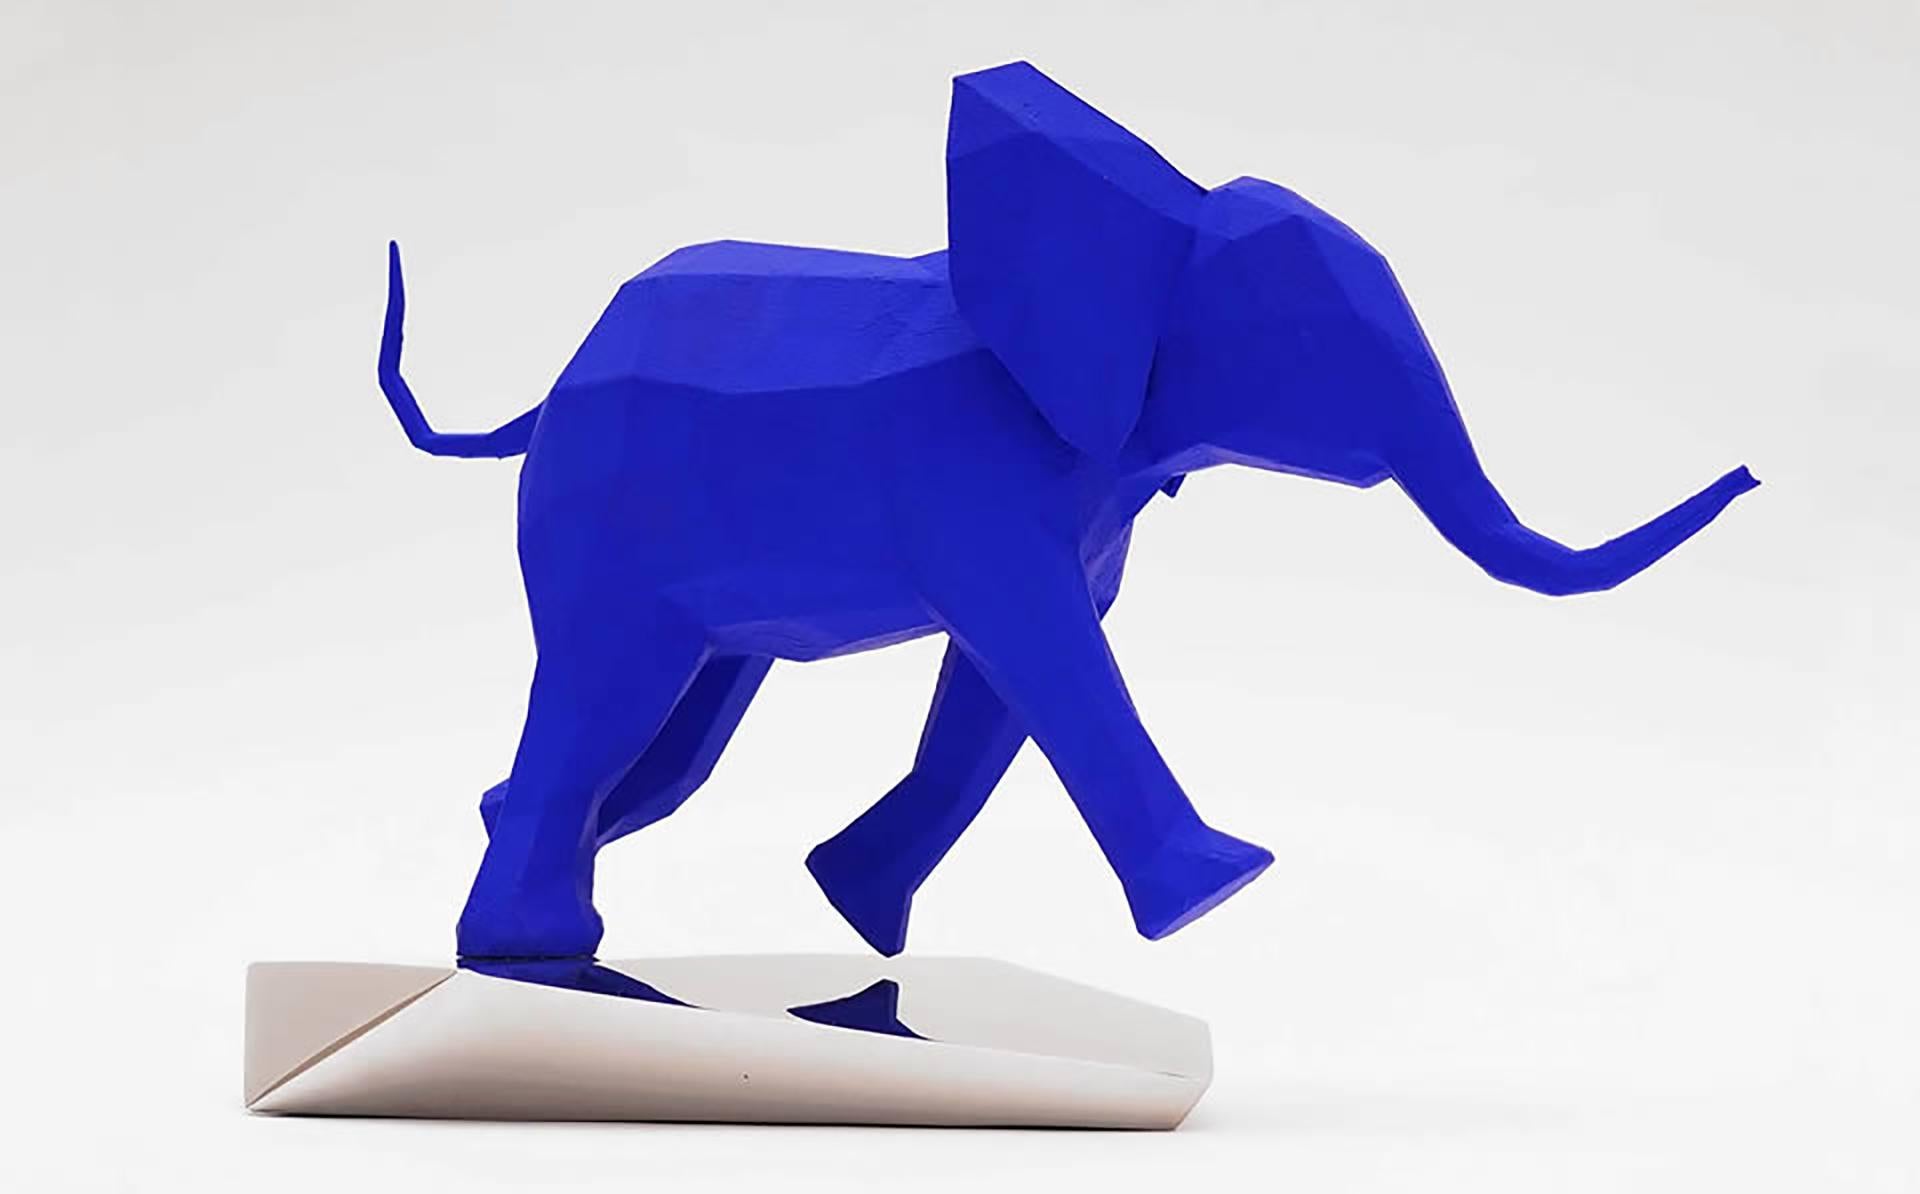 TITLE: Opiyaya (Barnabus)
ARTIST: Daniele Basso
YEAR: 2022
MEDIUM TYPE: Sculpture
MEDIUM/MATERIALS: Blue resin and stainless Steel mirror finish by hands
DIMENSIONS: 33 x 13 x h 21 cm
WEIGHT: 2 kg

The elephant is truly amazing: the great physical